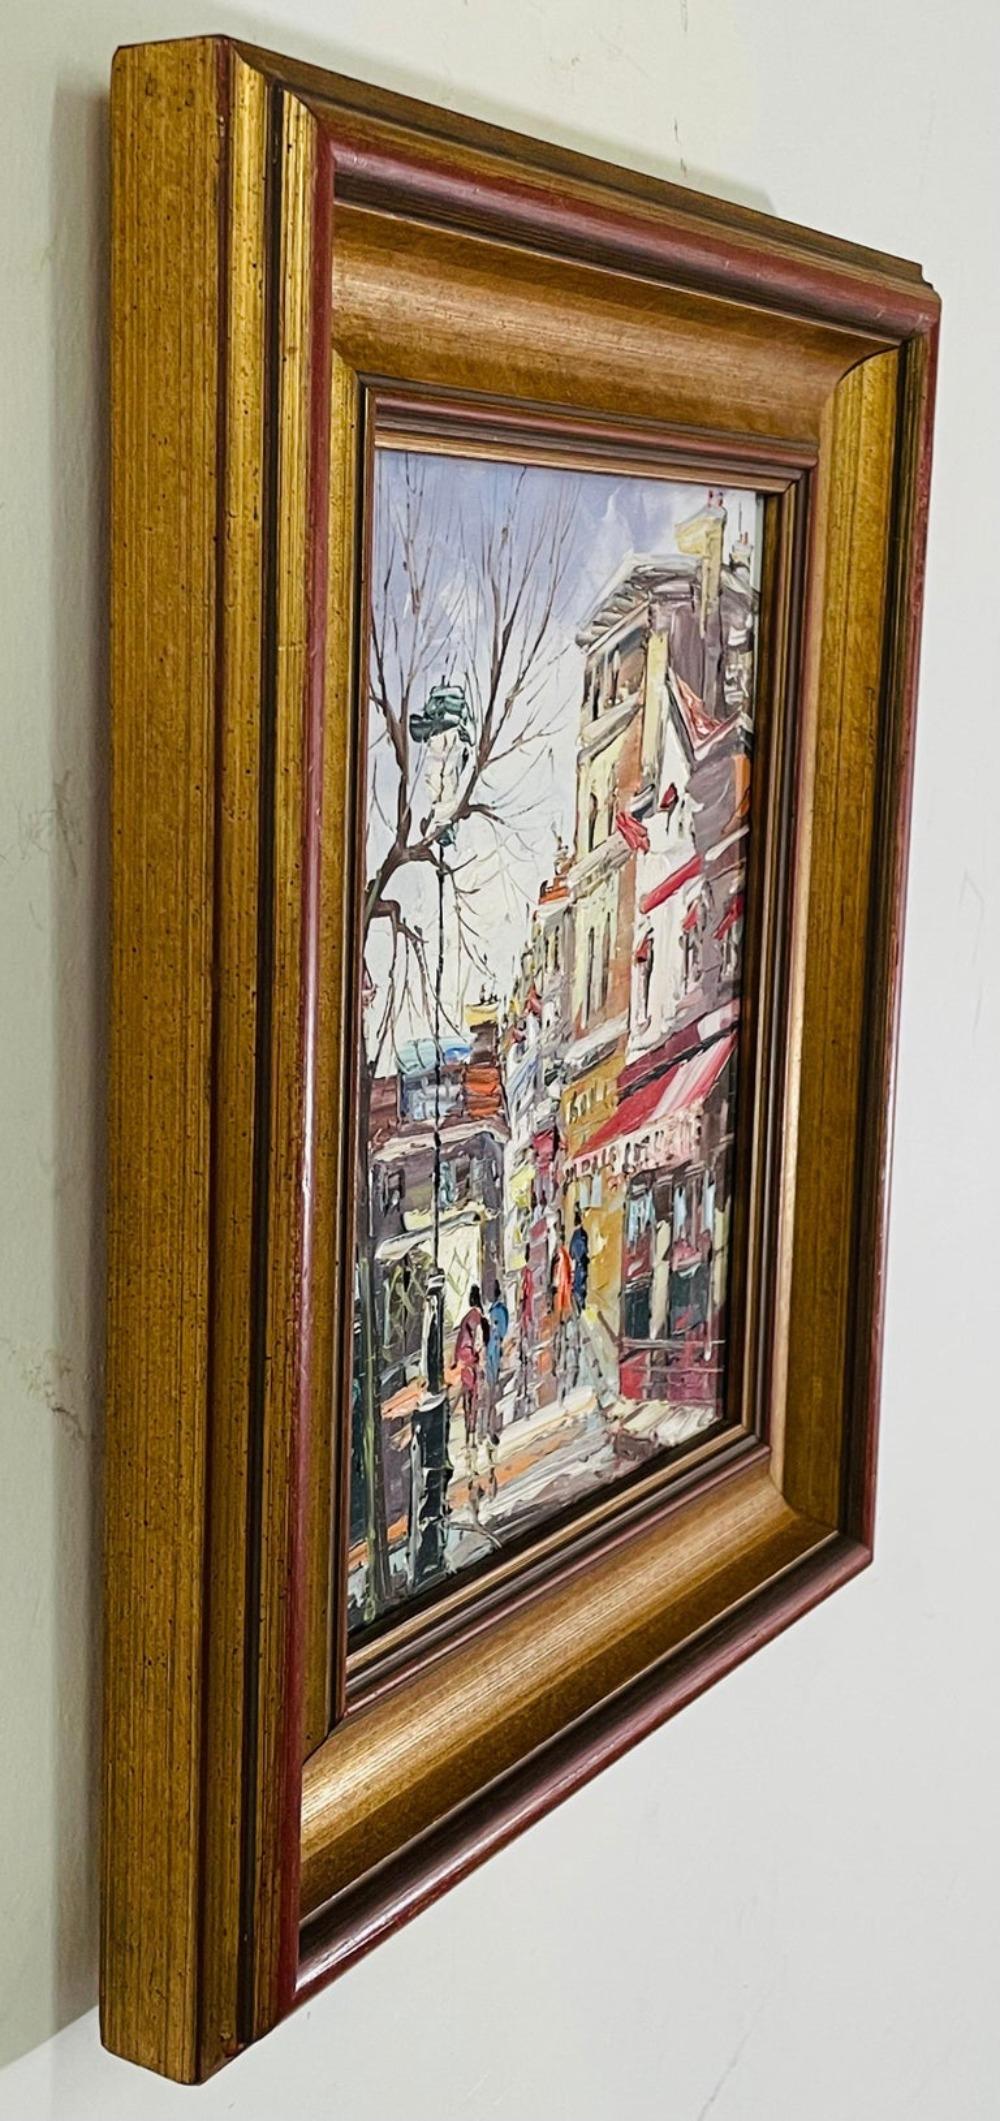 An elegant vintage impressionist oil on canvas painting signed by artist Tasica -1977. The painting features a street scene in the city. It is beautifully framed in a wood frame painted in gold and brown.

Dimensions: 11.5